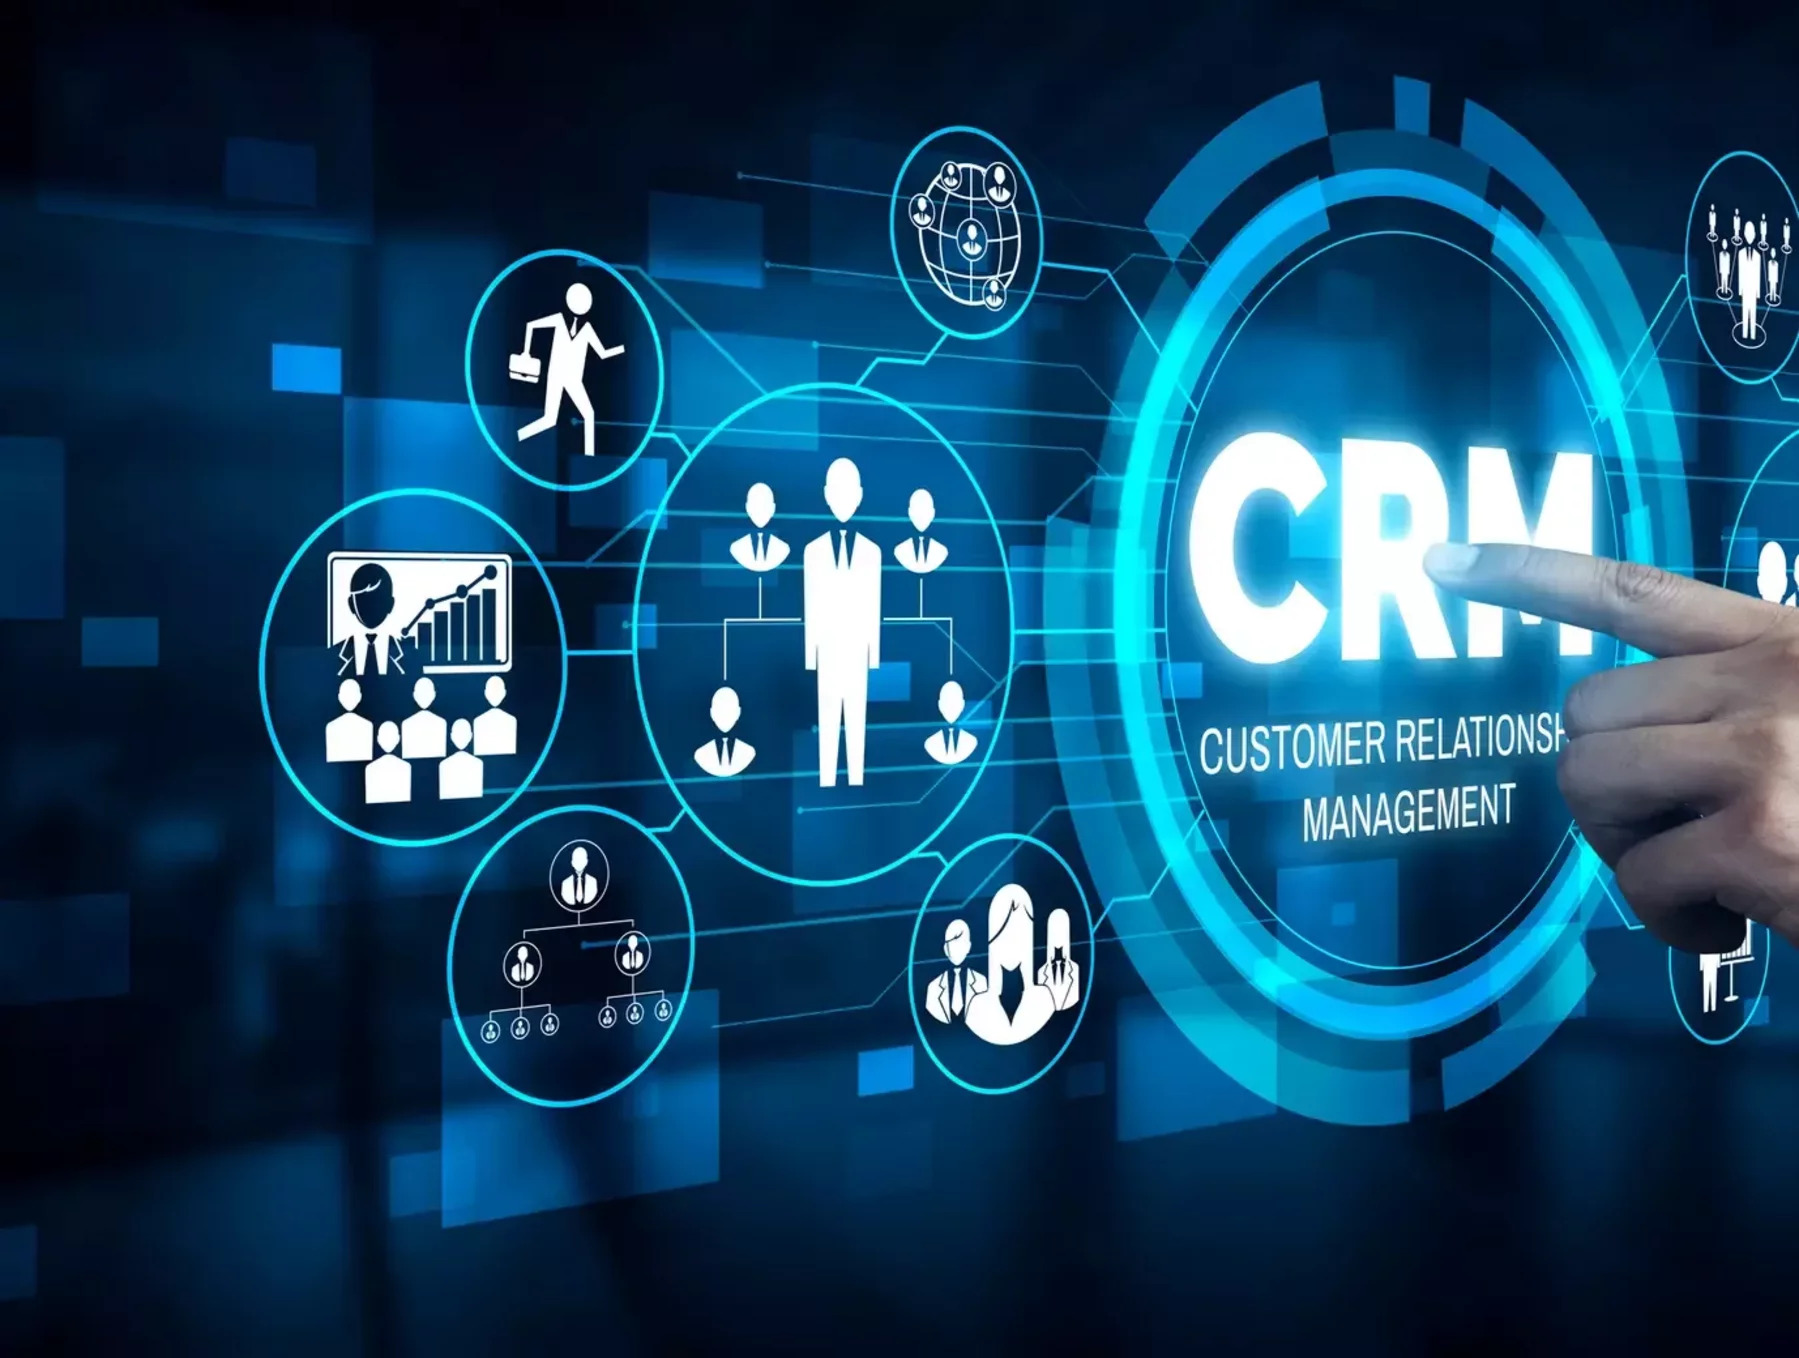 Top 10 Features to Look for in a CRM Solution